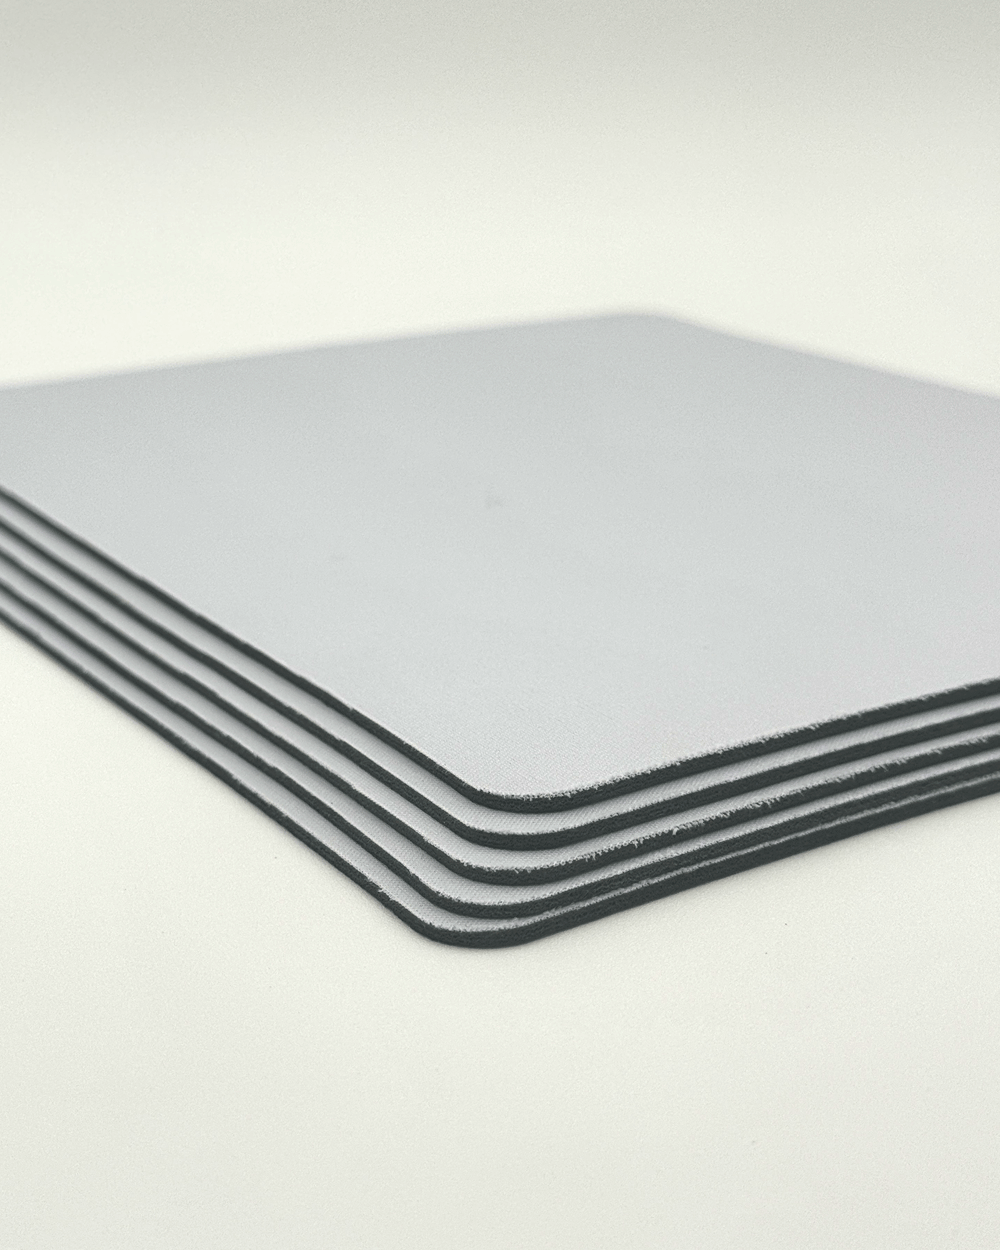 Small Mouse Pad with Nonslip Base (SIZE 8"x9")